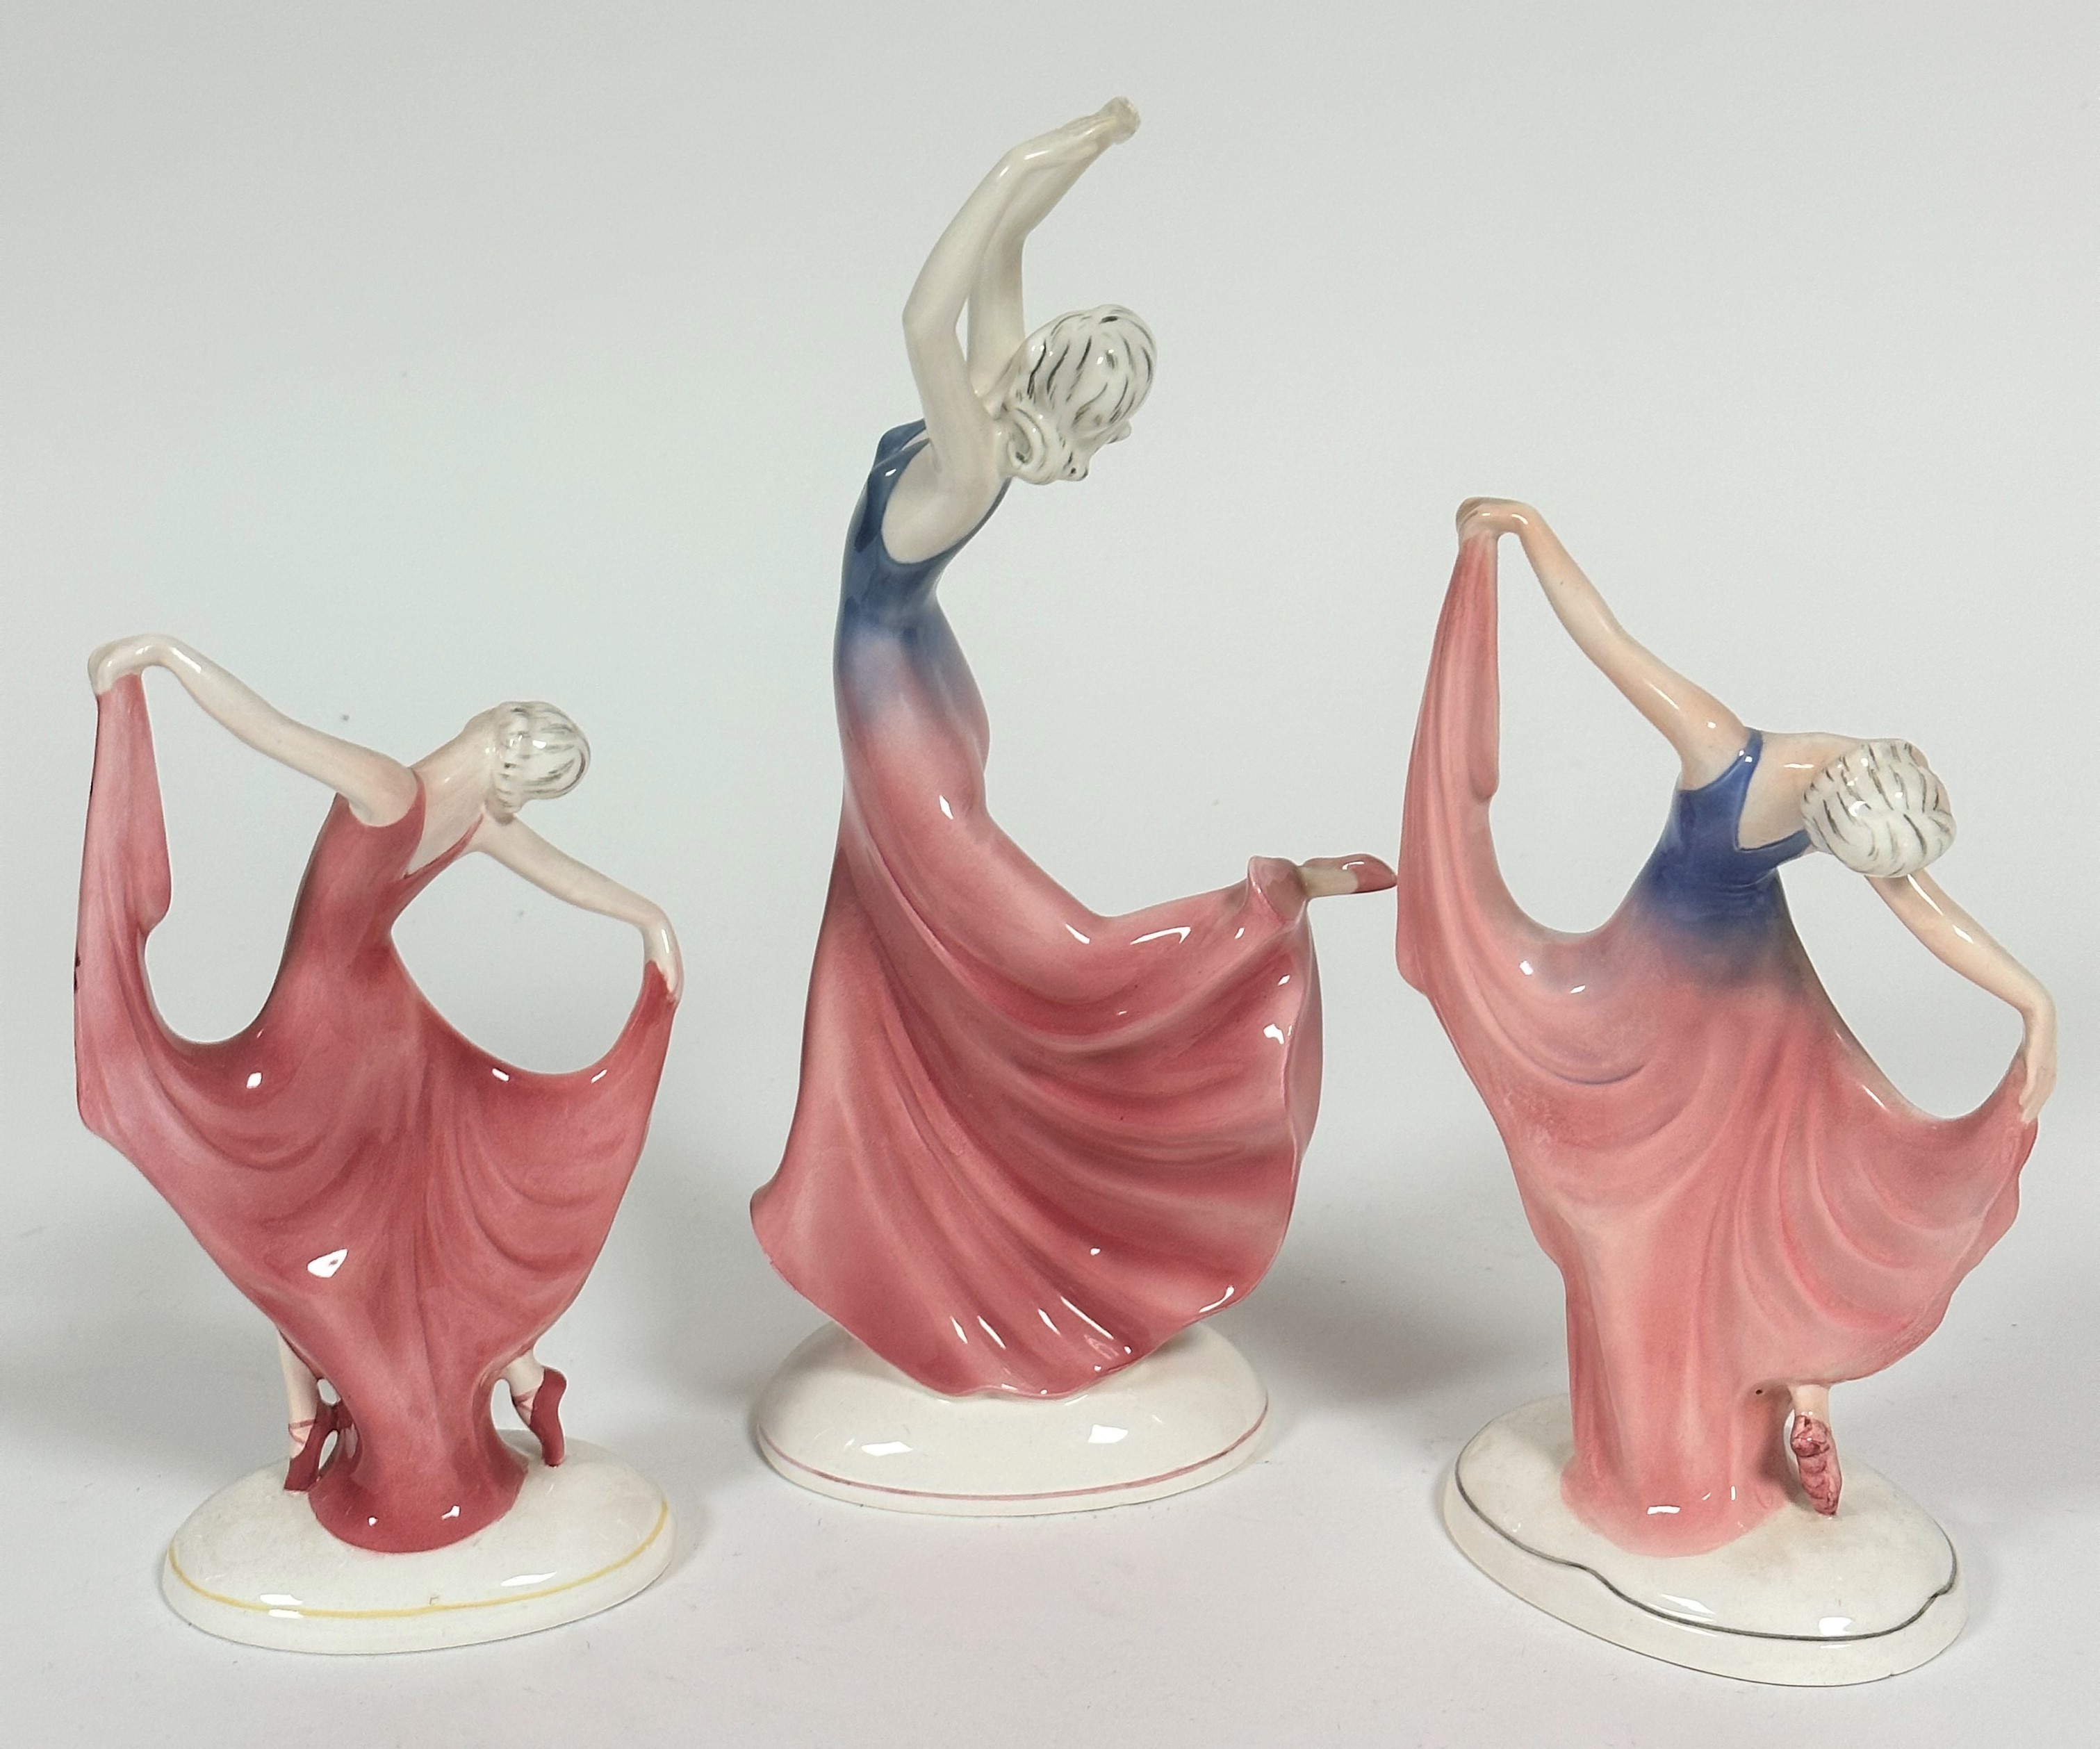 A pair of Katzhutte Art Deco style Standing Figures, both in Evening Dress, Dancing, one with blue - Image 2 of 2